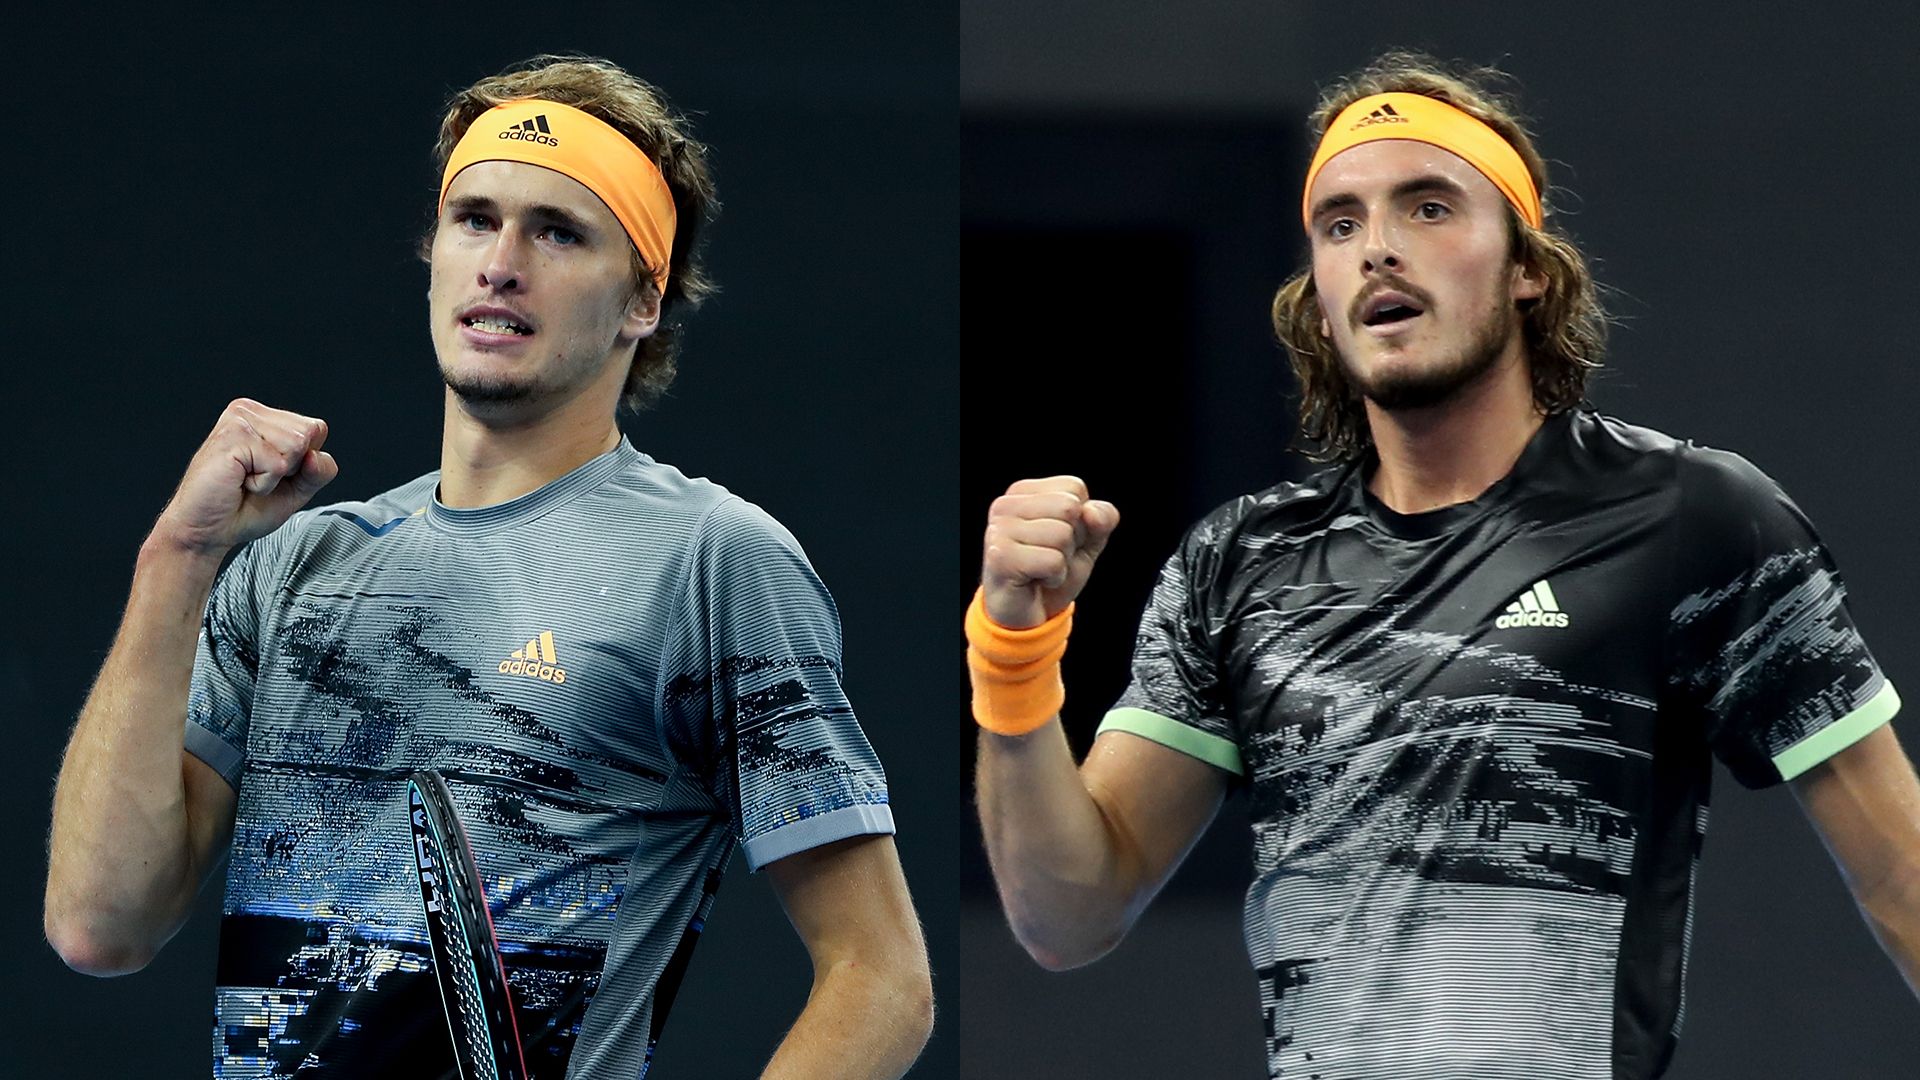 French Open 2021 semi-finals are underway: Zverev vs. Tsitsipas, which of these young stars will go in the final?  Preview, Livestream, Head-to-heads, and predictions.